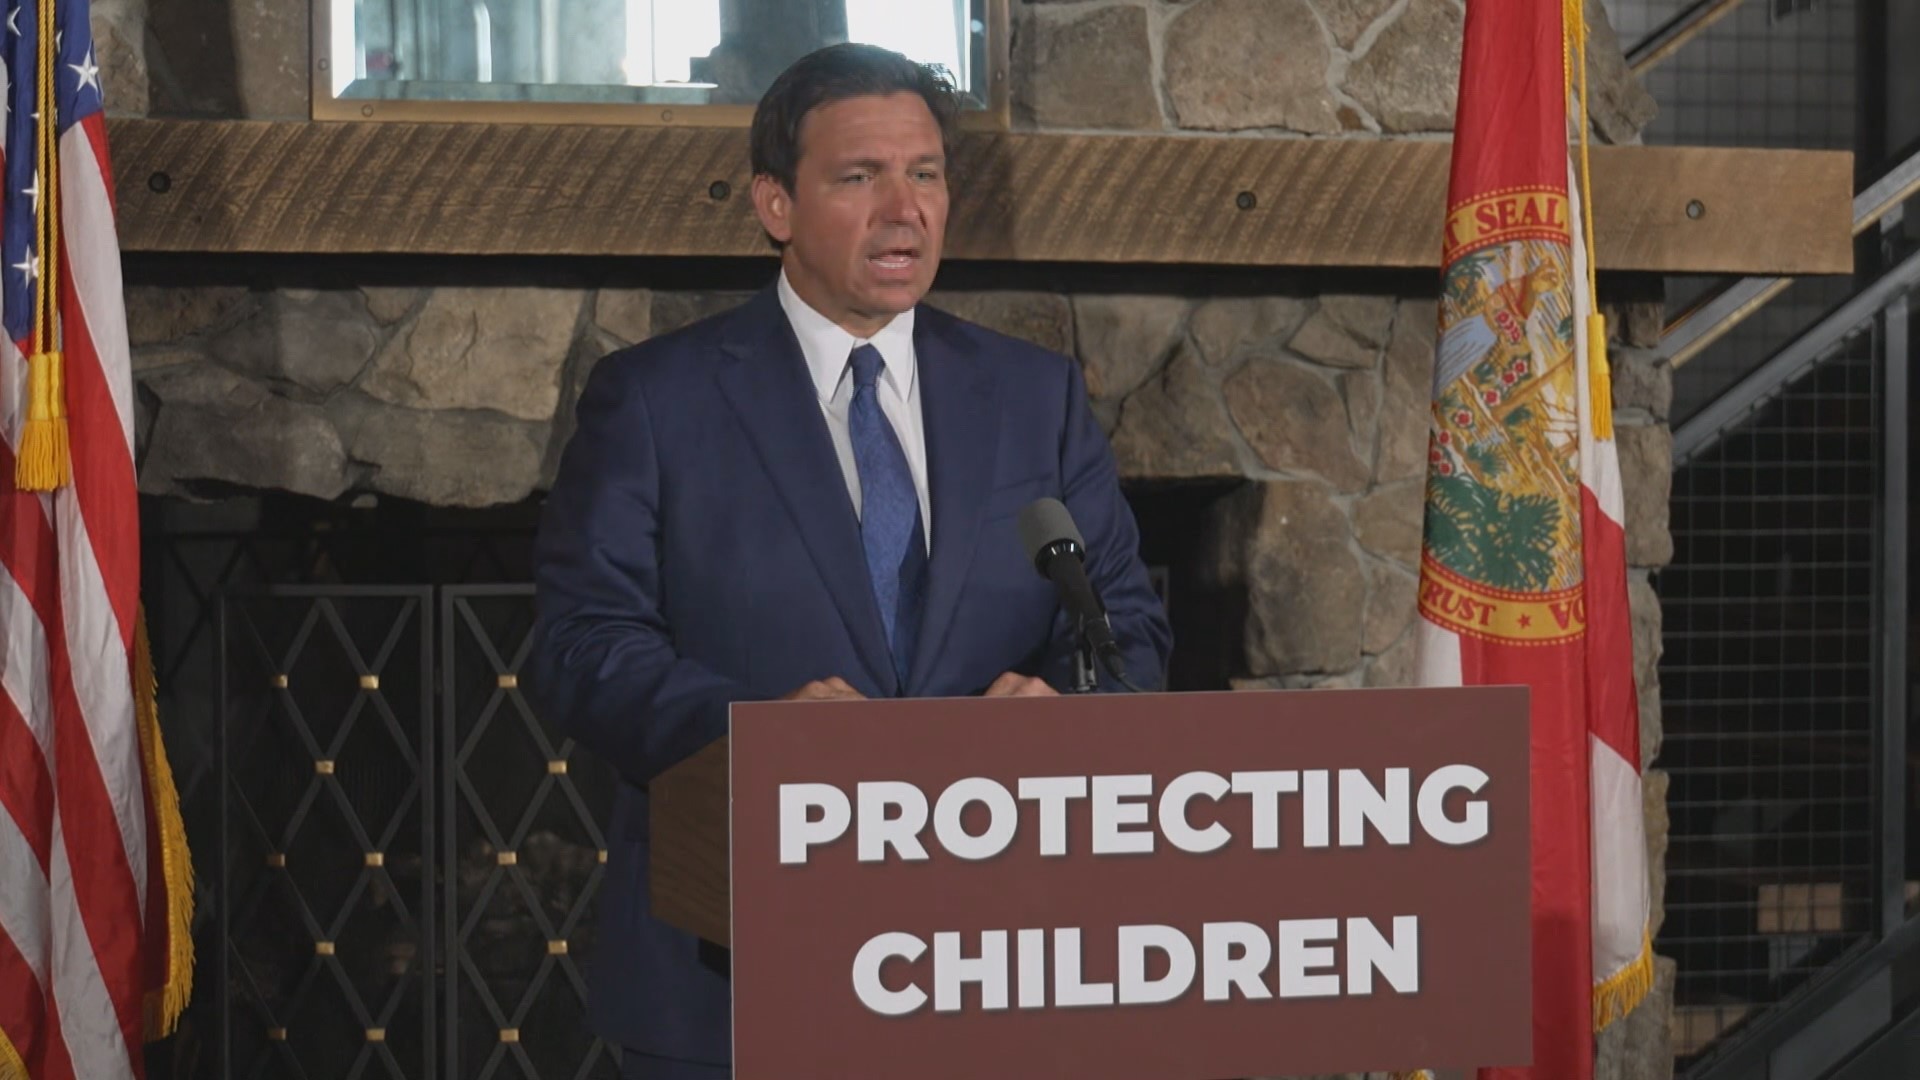 During a press conference on Wednesday, Desantis gave final approval on five bills.